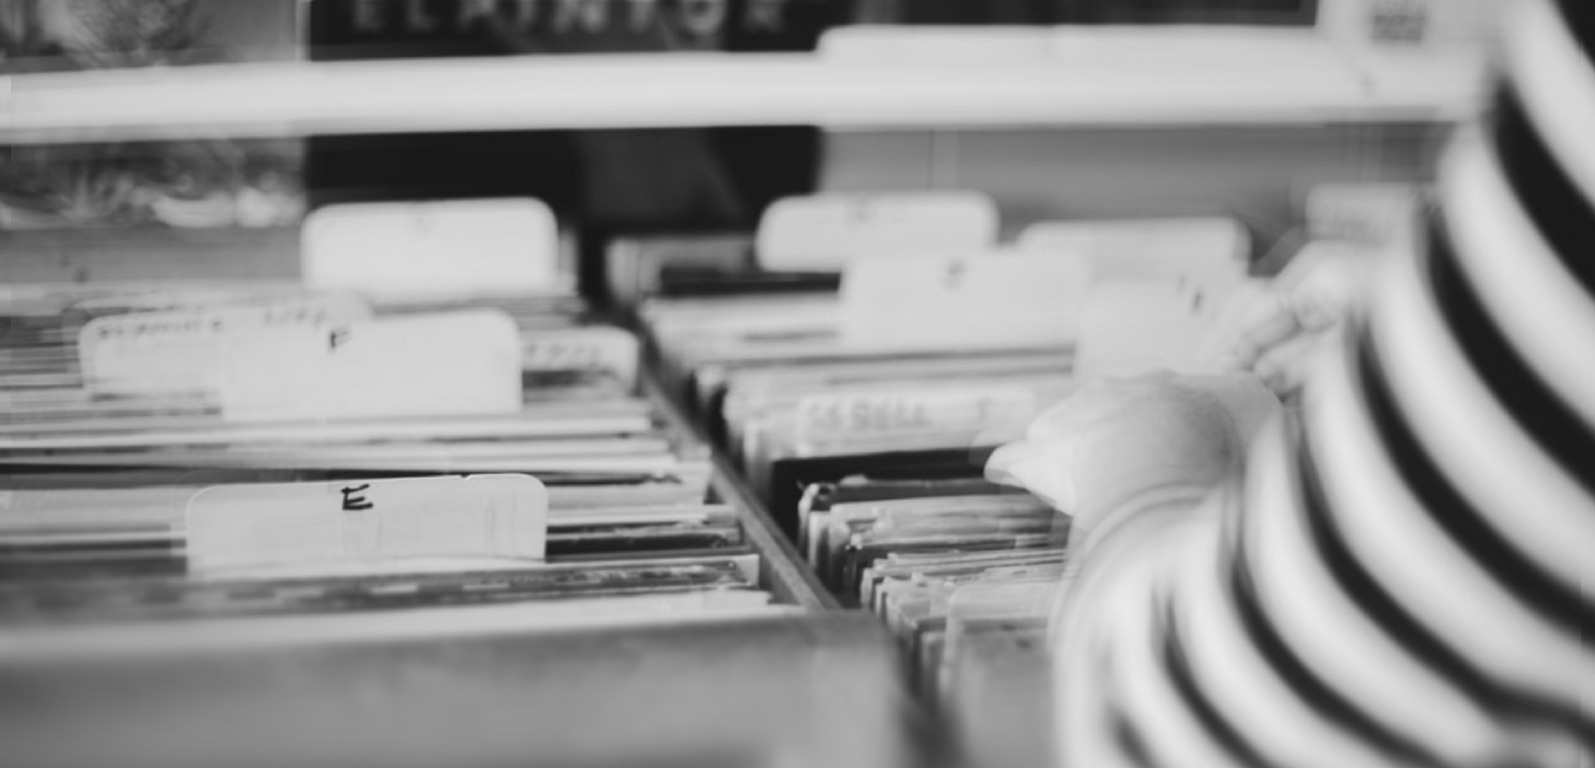 blurry photos of a person flipping through record bins in a record store